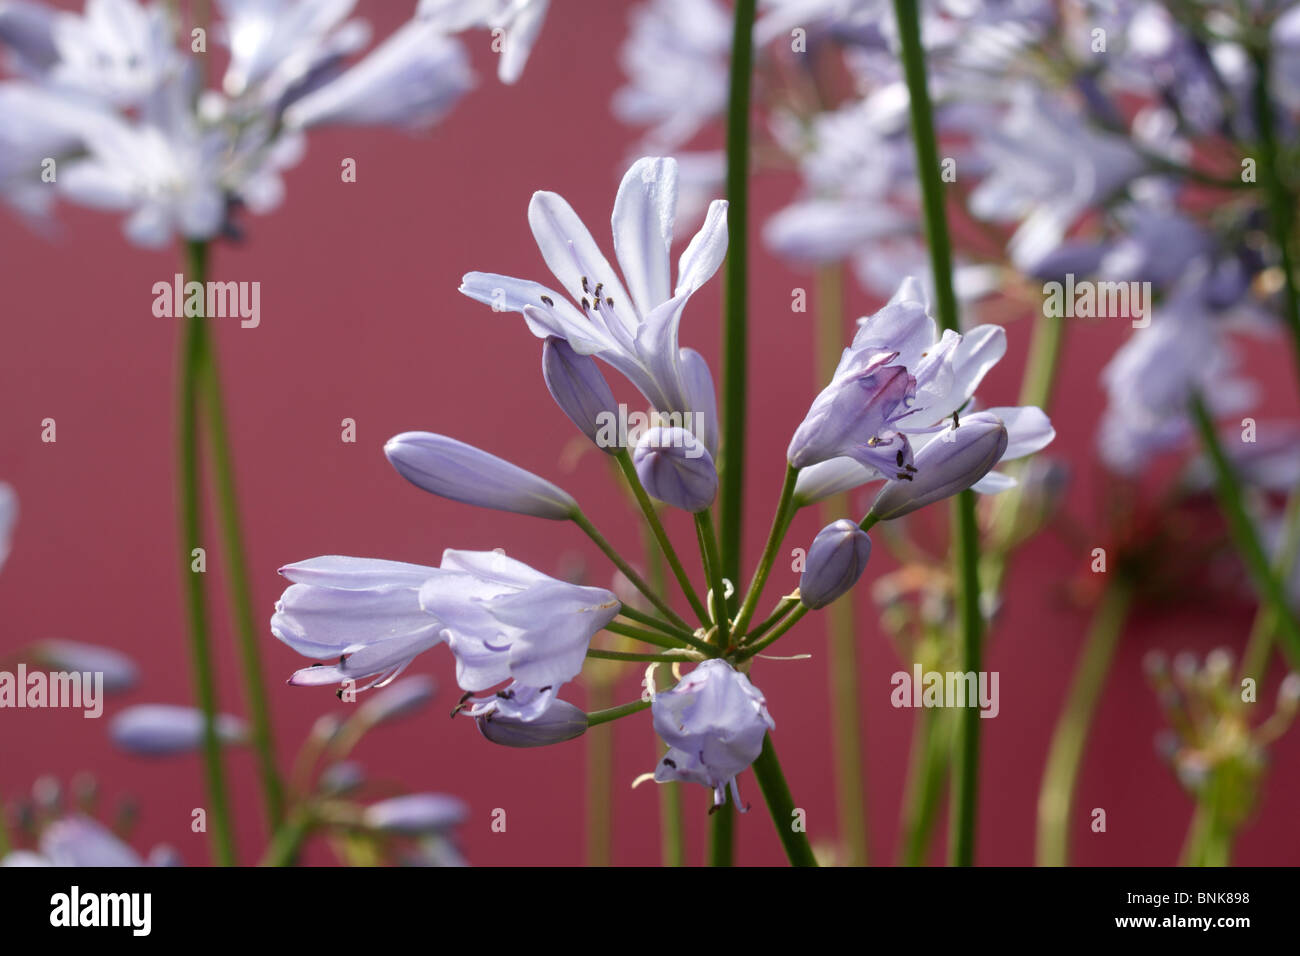 Agapanthus 'Streamline', African lily 'Streamline','Streamline' is a small, semi-evergeen perennial with clumps of strap-like, mid-green leaves and open, mid-blue flowerheads borne on strong stems in summer to early autumn. Stock Photo